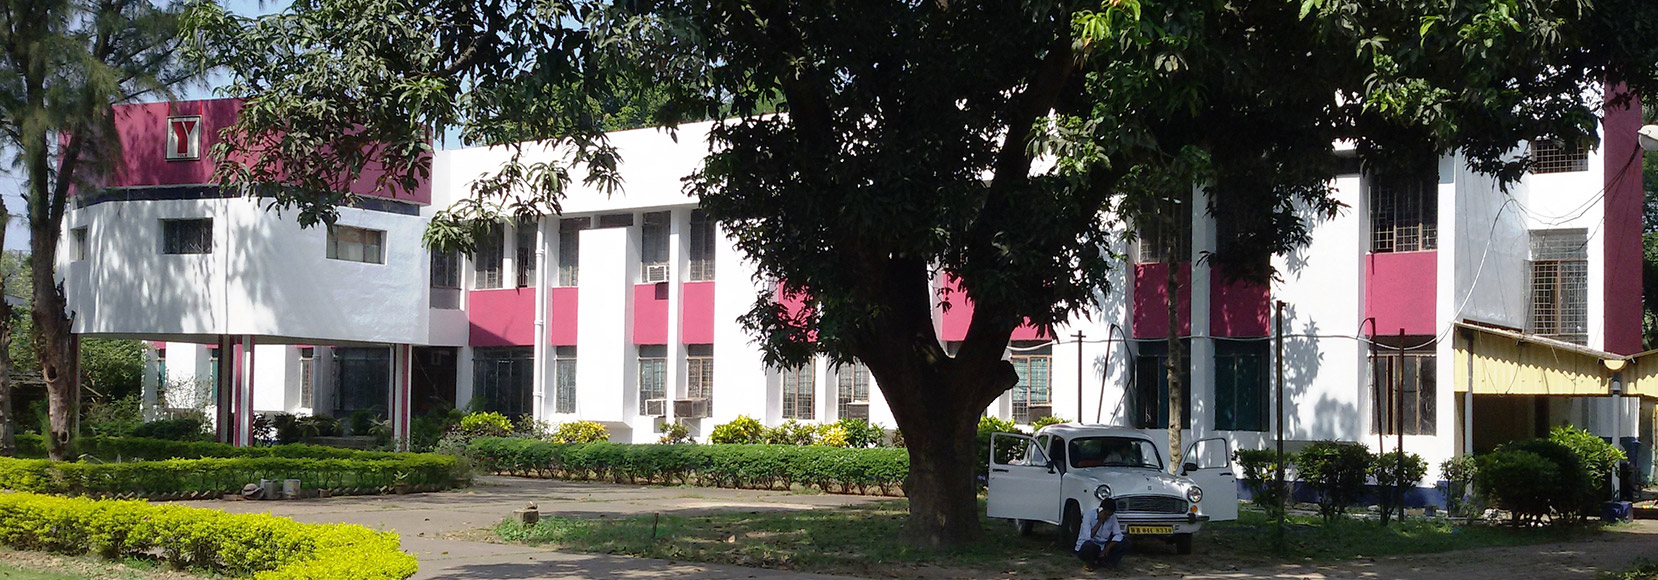 Administrative Building of Engineering Division.